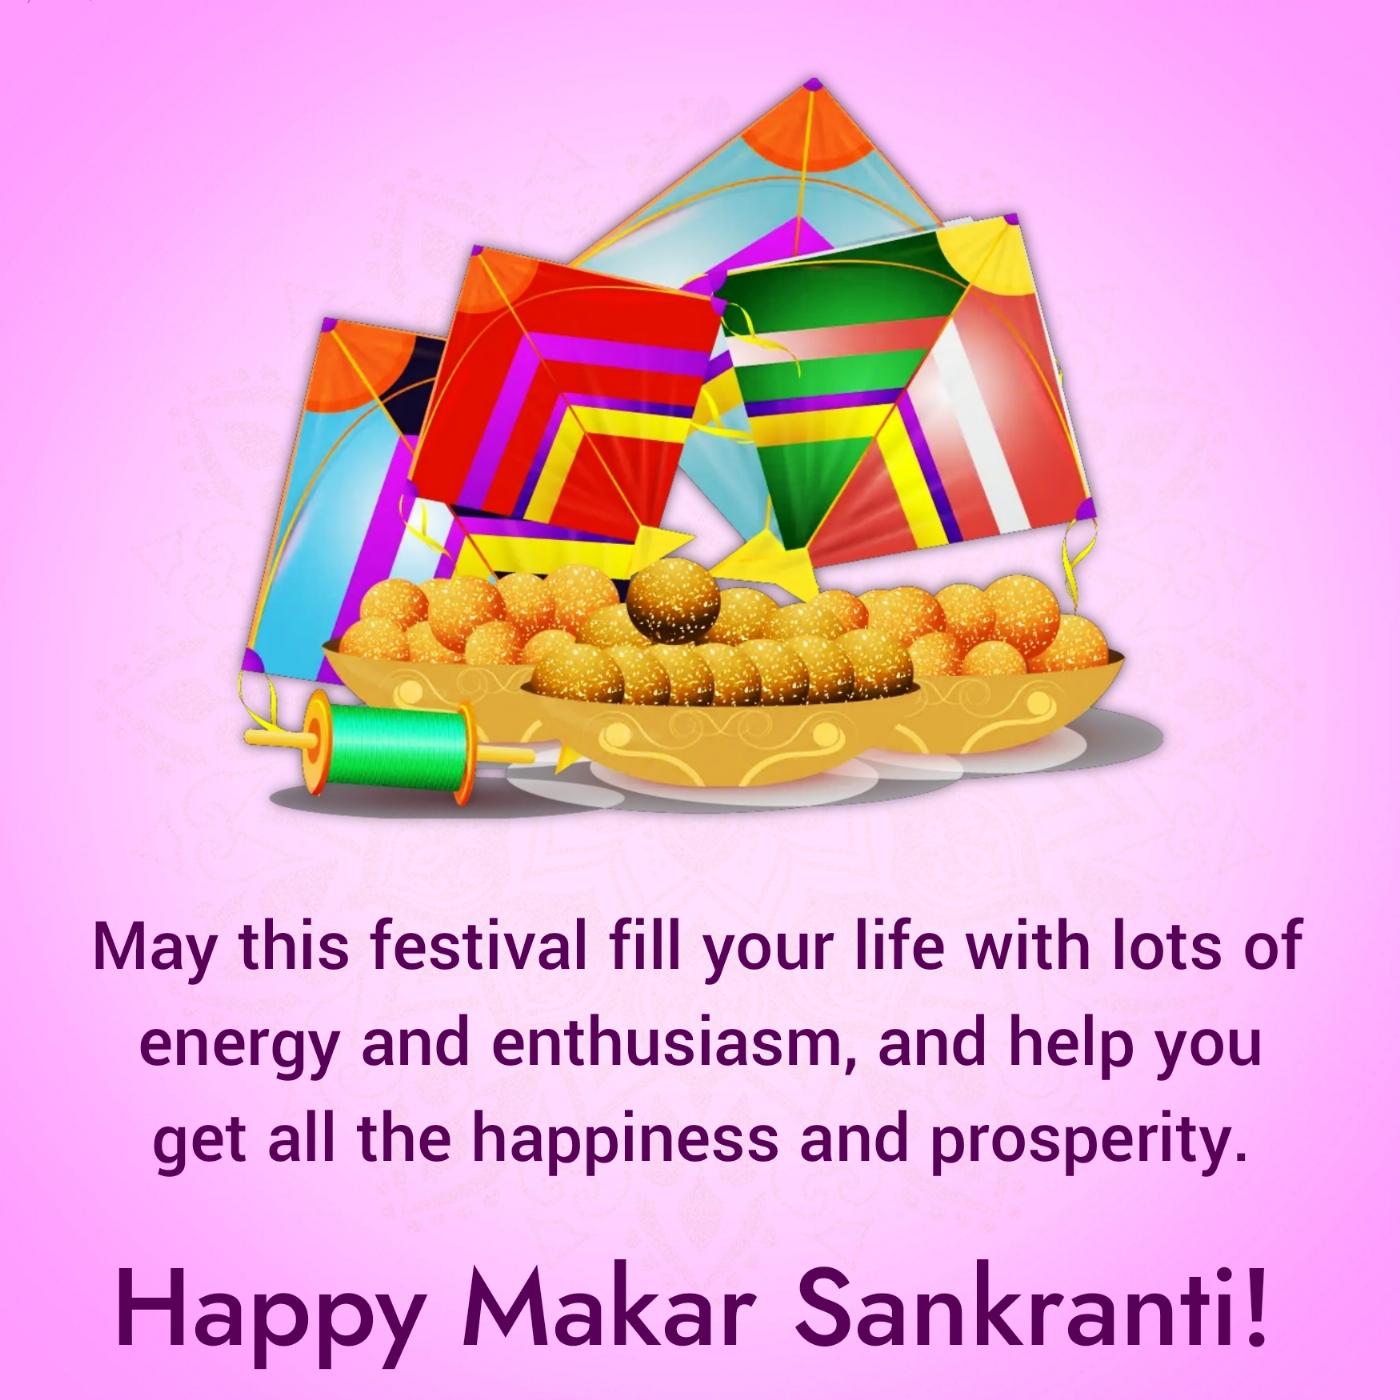 May this festival fill your life with lots of energy